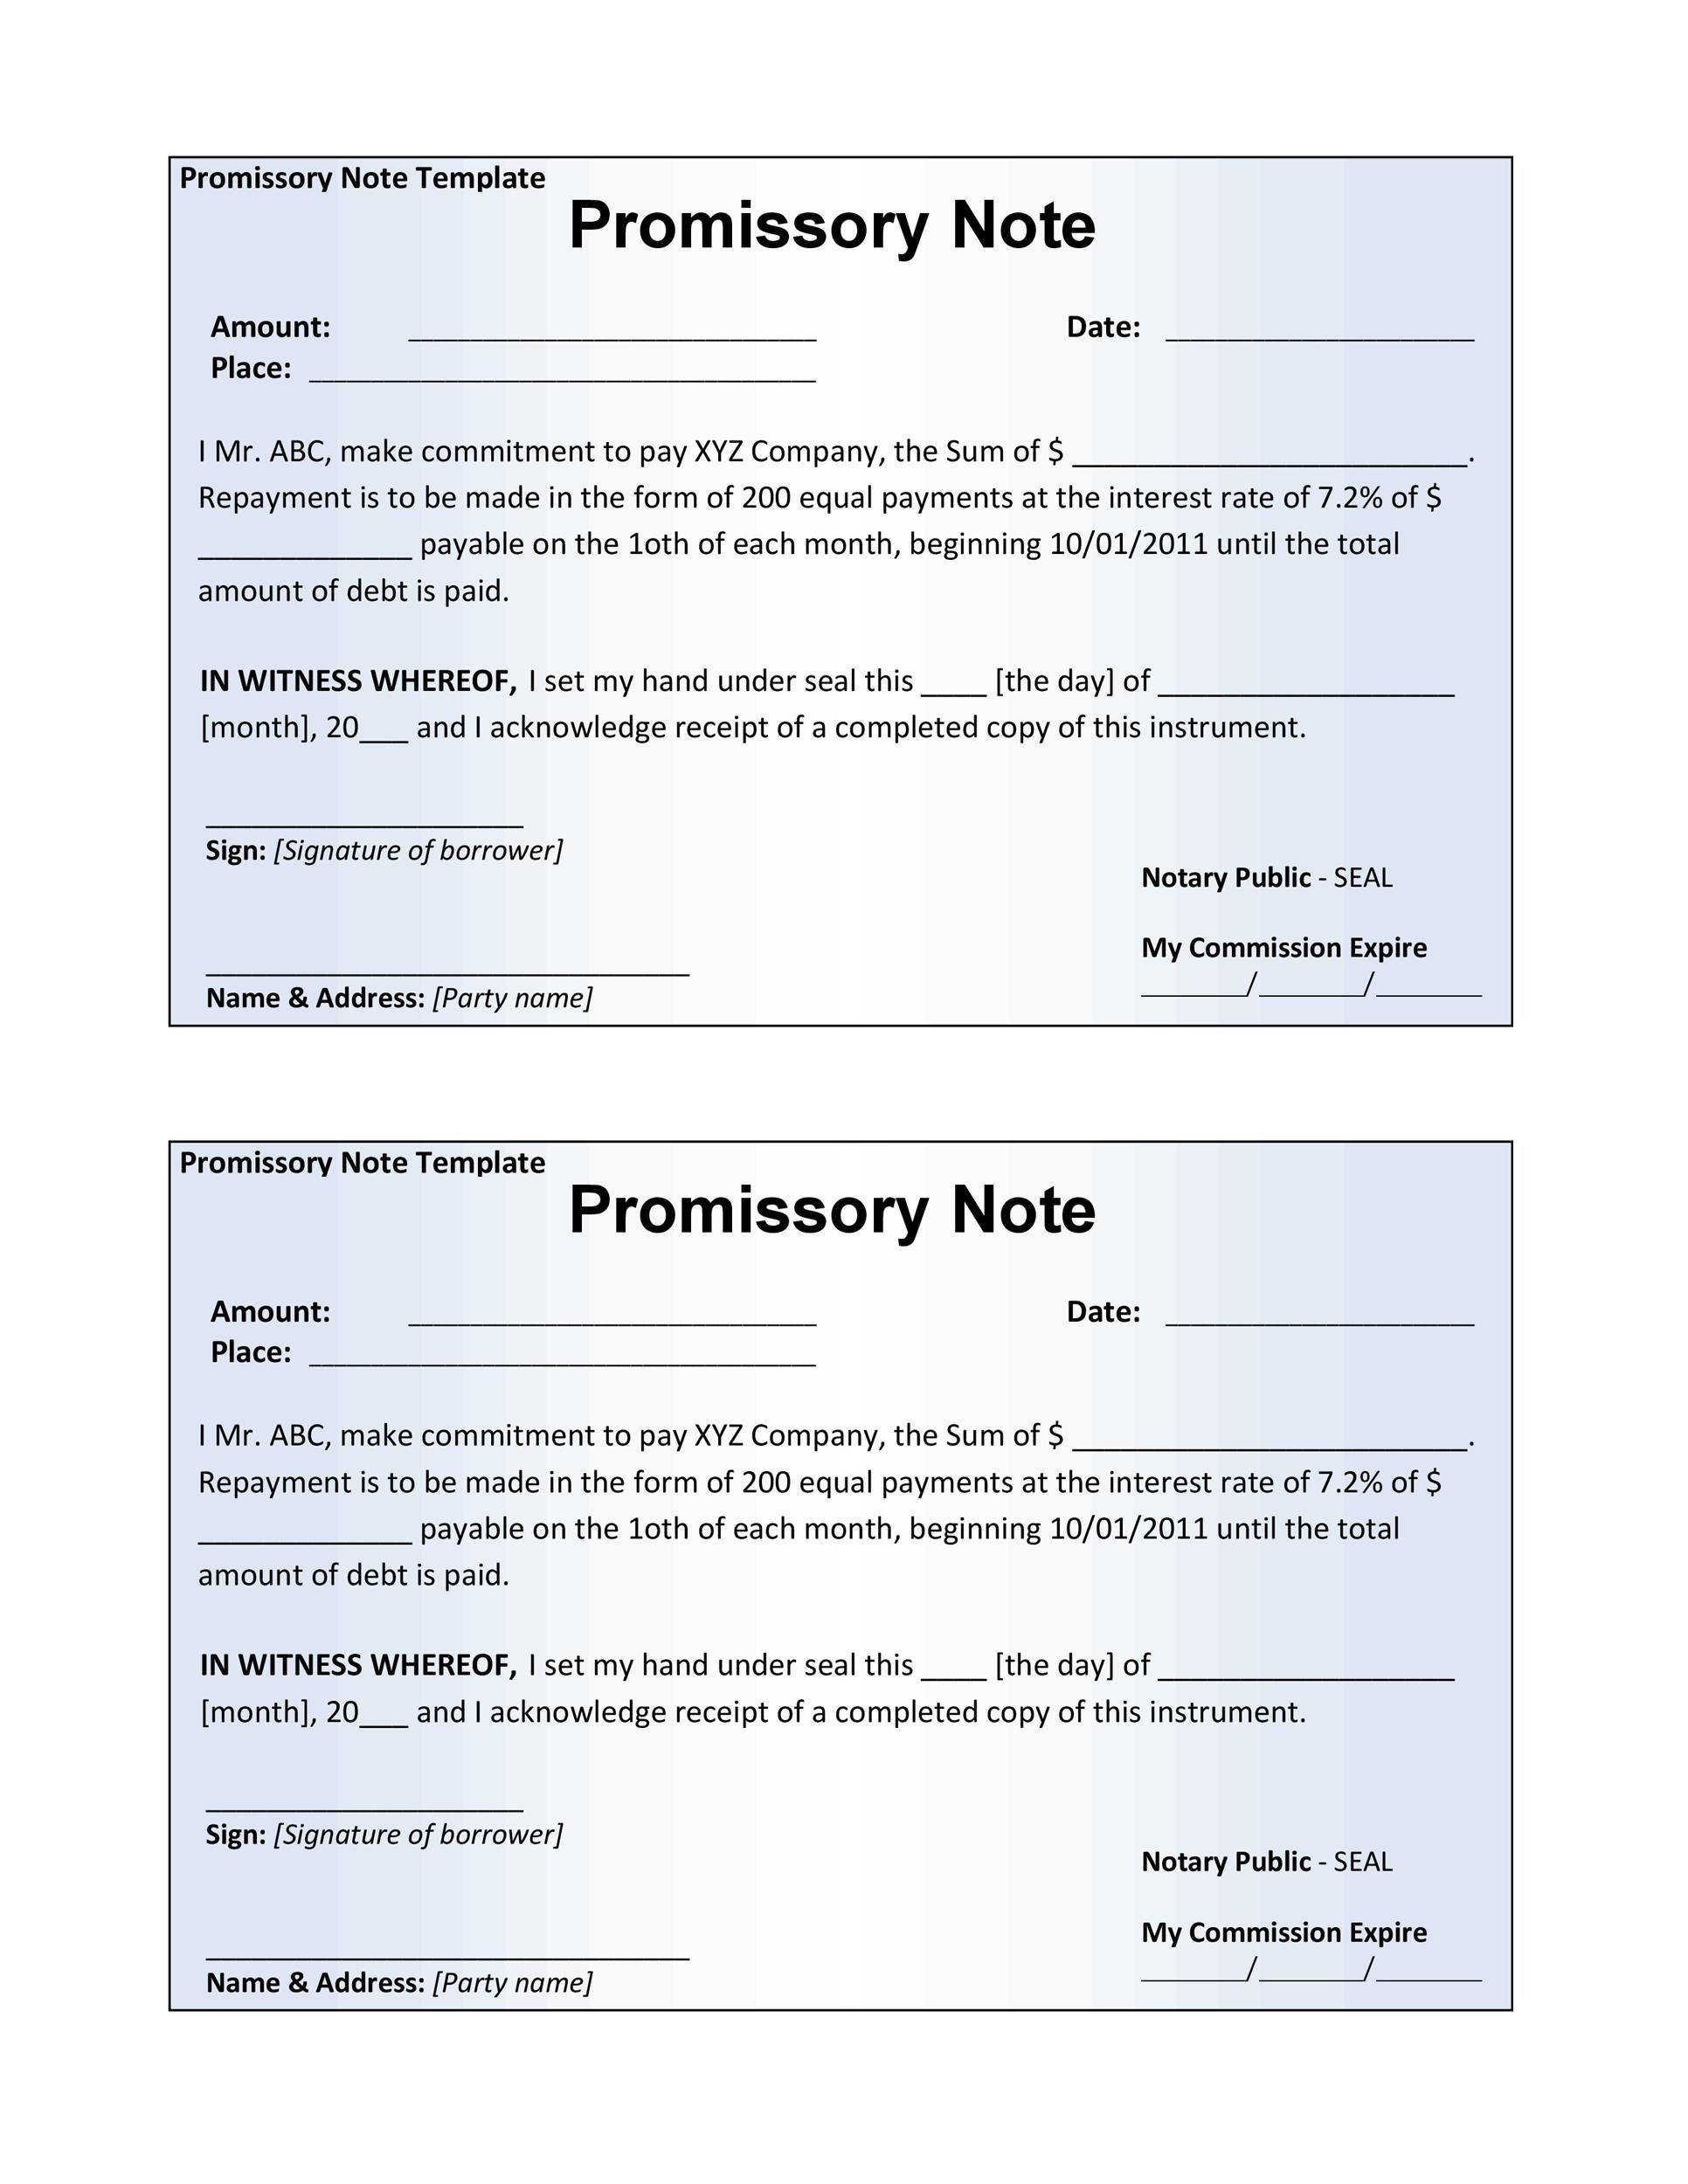 promissory-note-payoff-letter